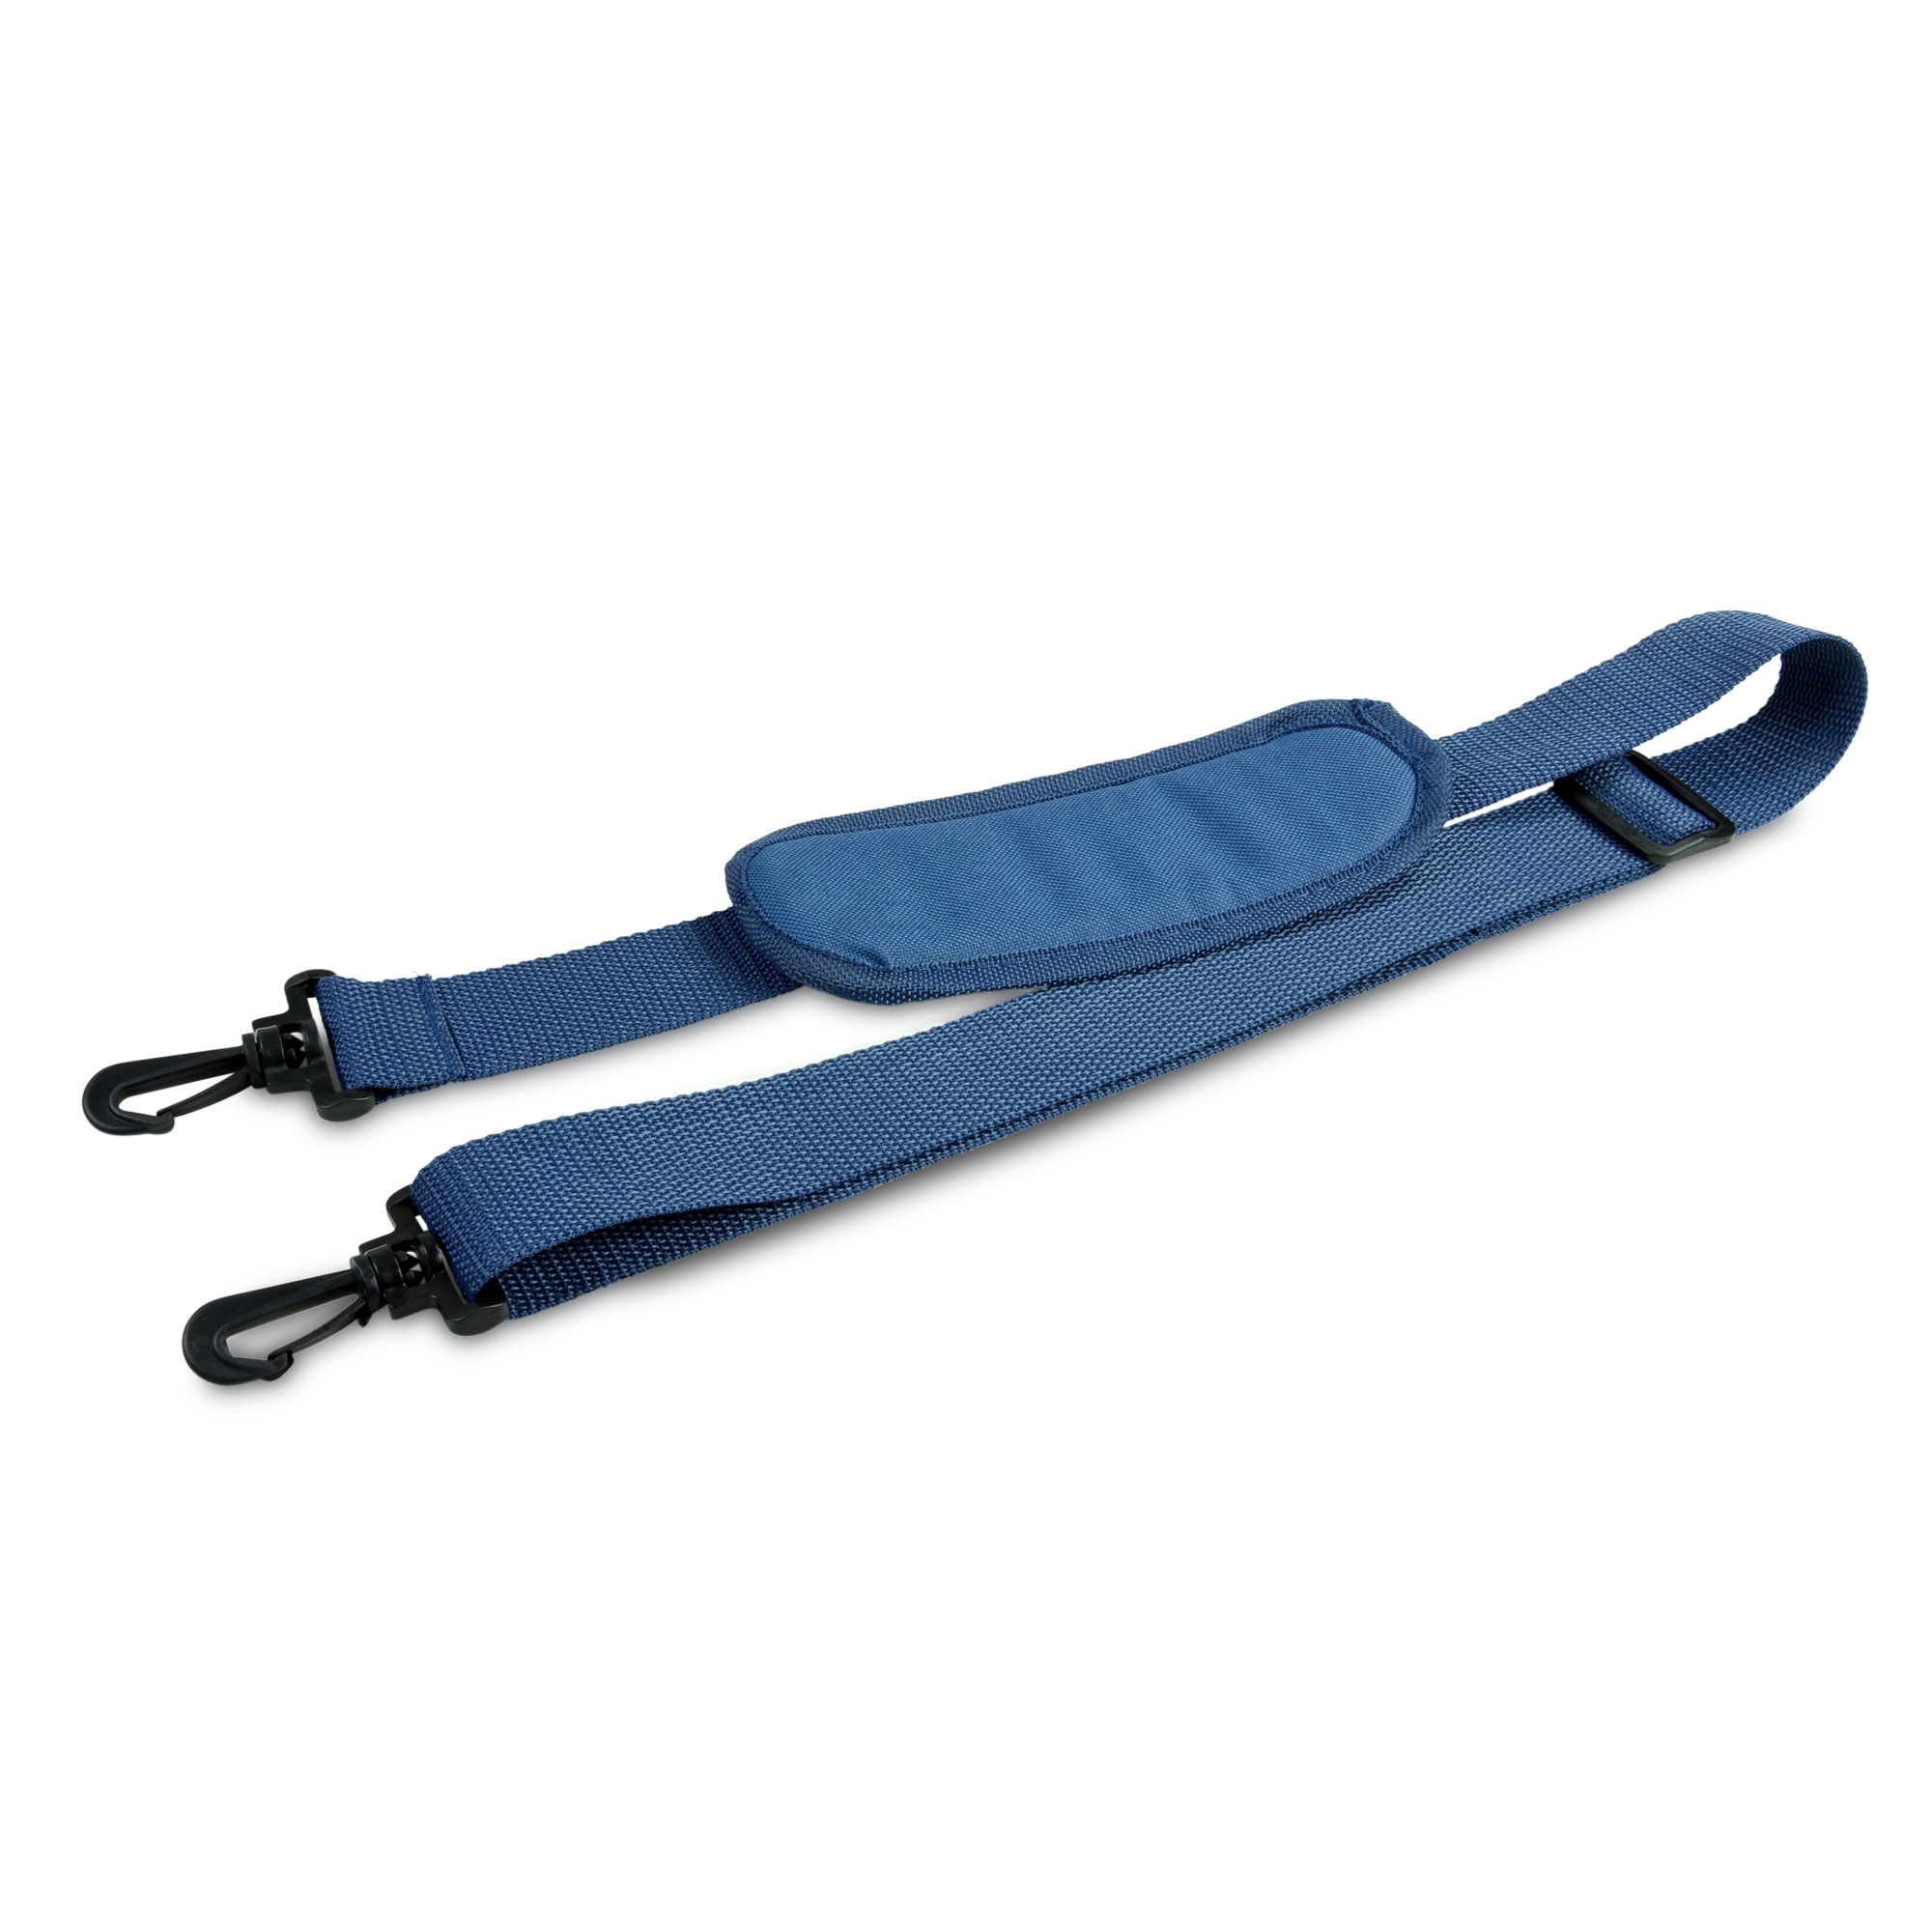 DALIX Premium Replacement Strap With Pad Laptop Travel Duffle Bag In Navy Blue - image 1 of 5